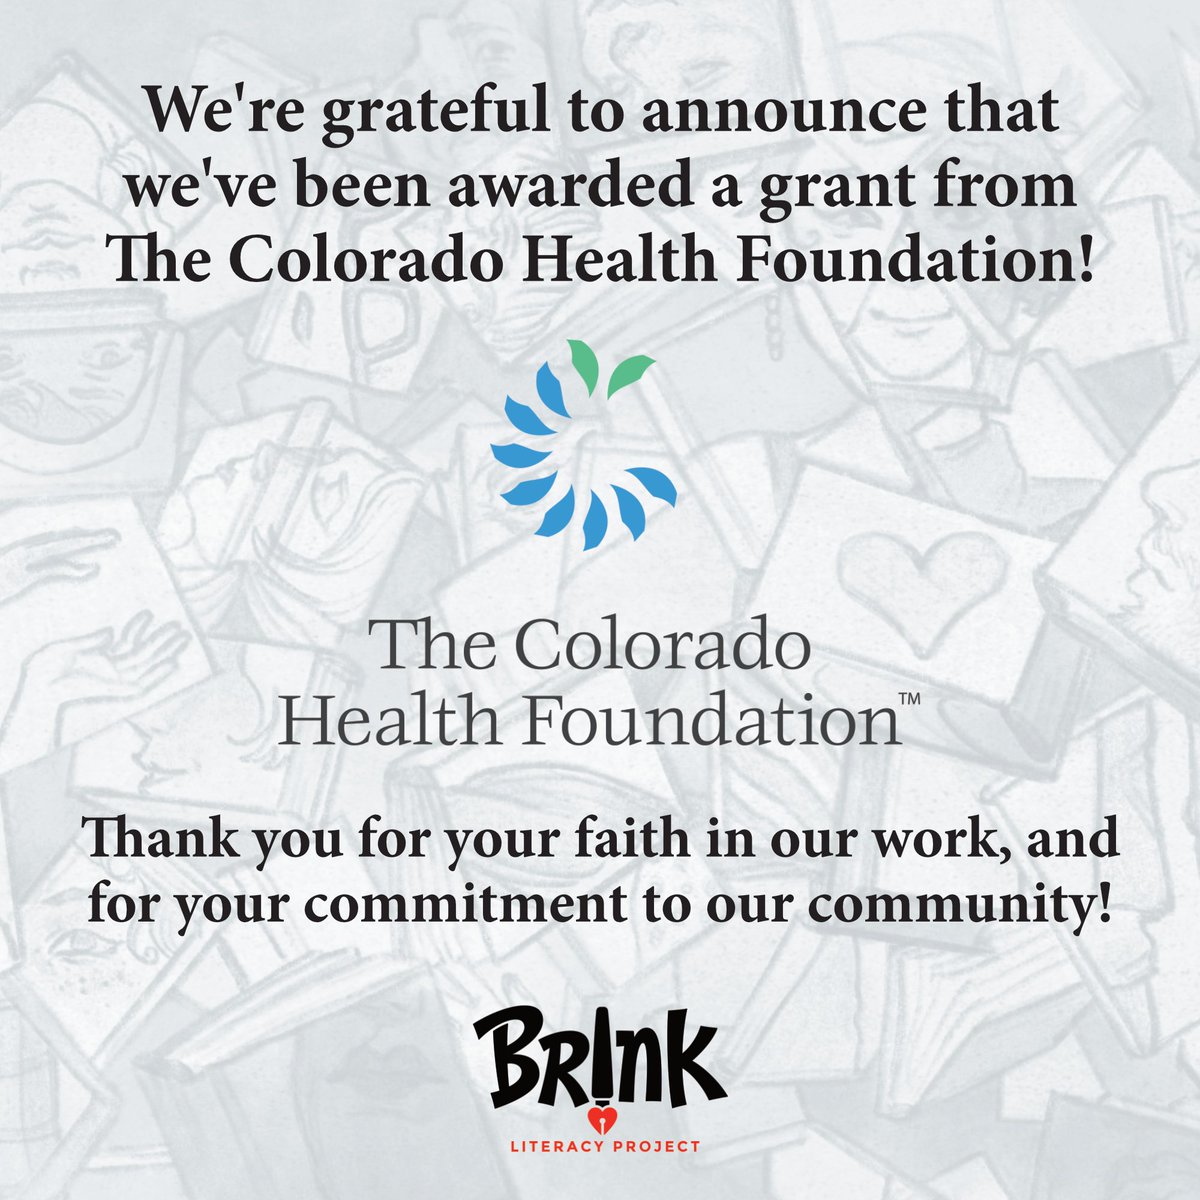 🙏 We're grateful to announce that we've been awarded a grant from The Colorado Health Foundation!

Thank you for your faith in our work, and for your commitment to our community! 🙌
.
#causes #Colorado #dogood #nonprofit